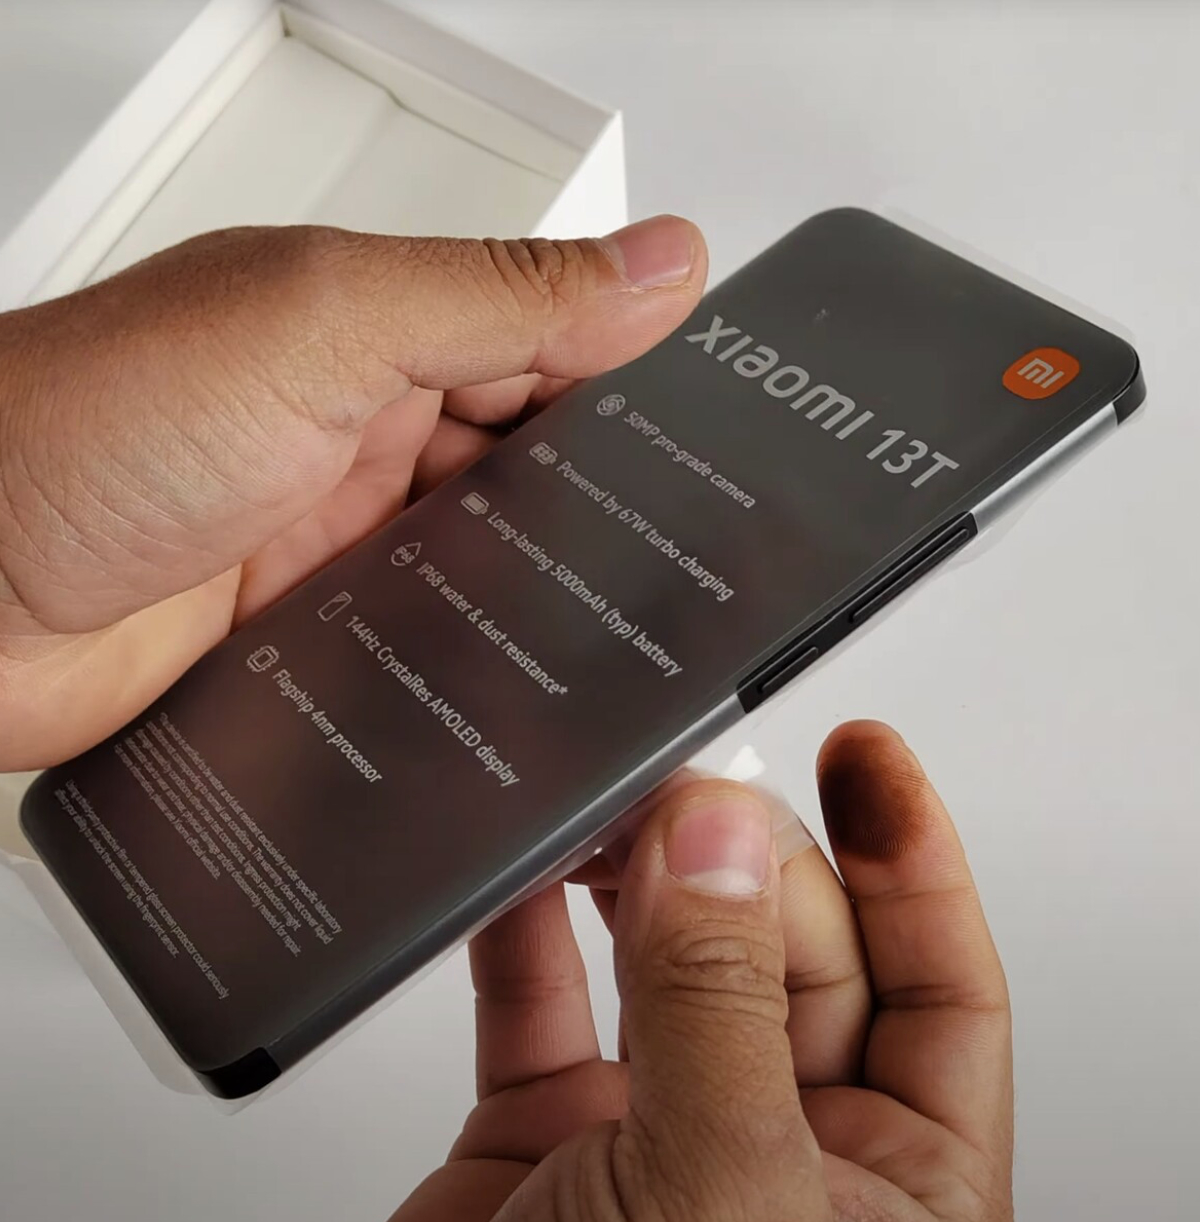 How Good is the Redmi Note 13 5G? Unboxing and Hands-on Review 